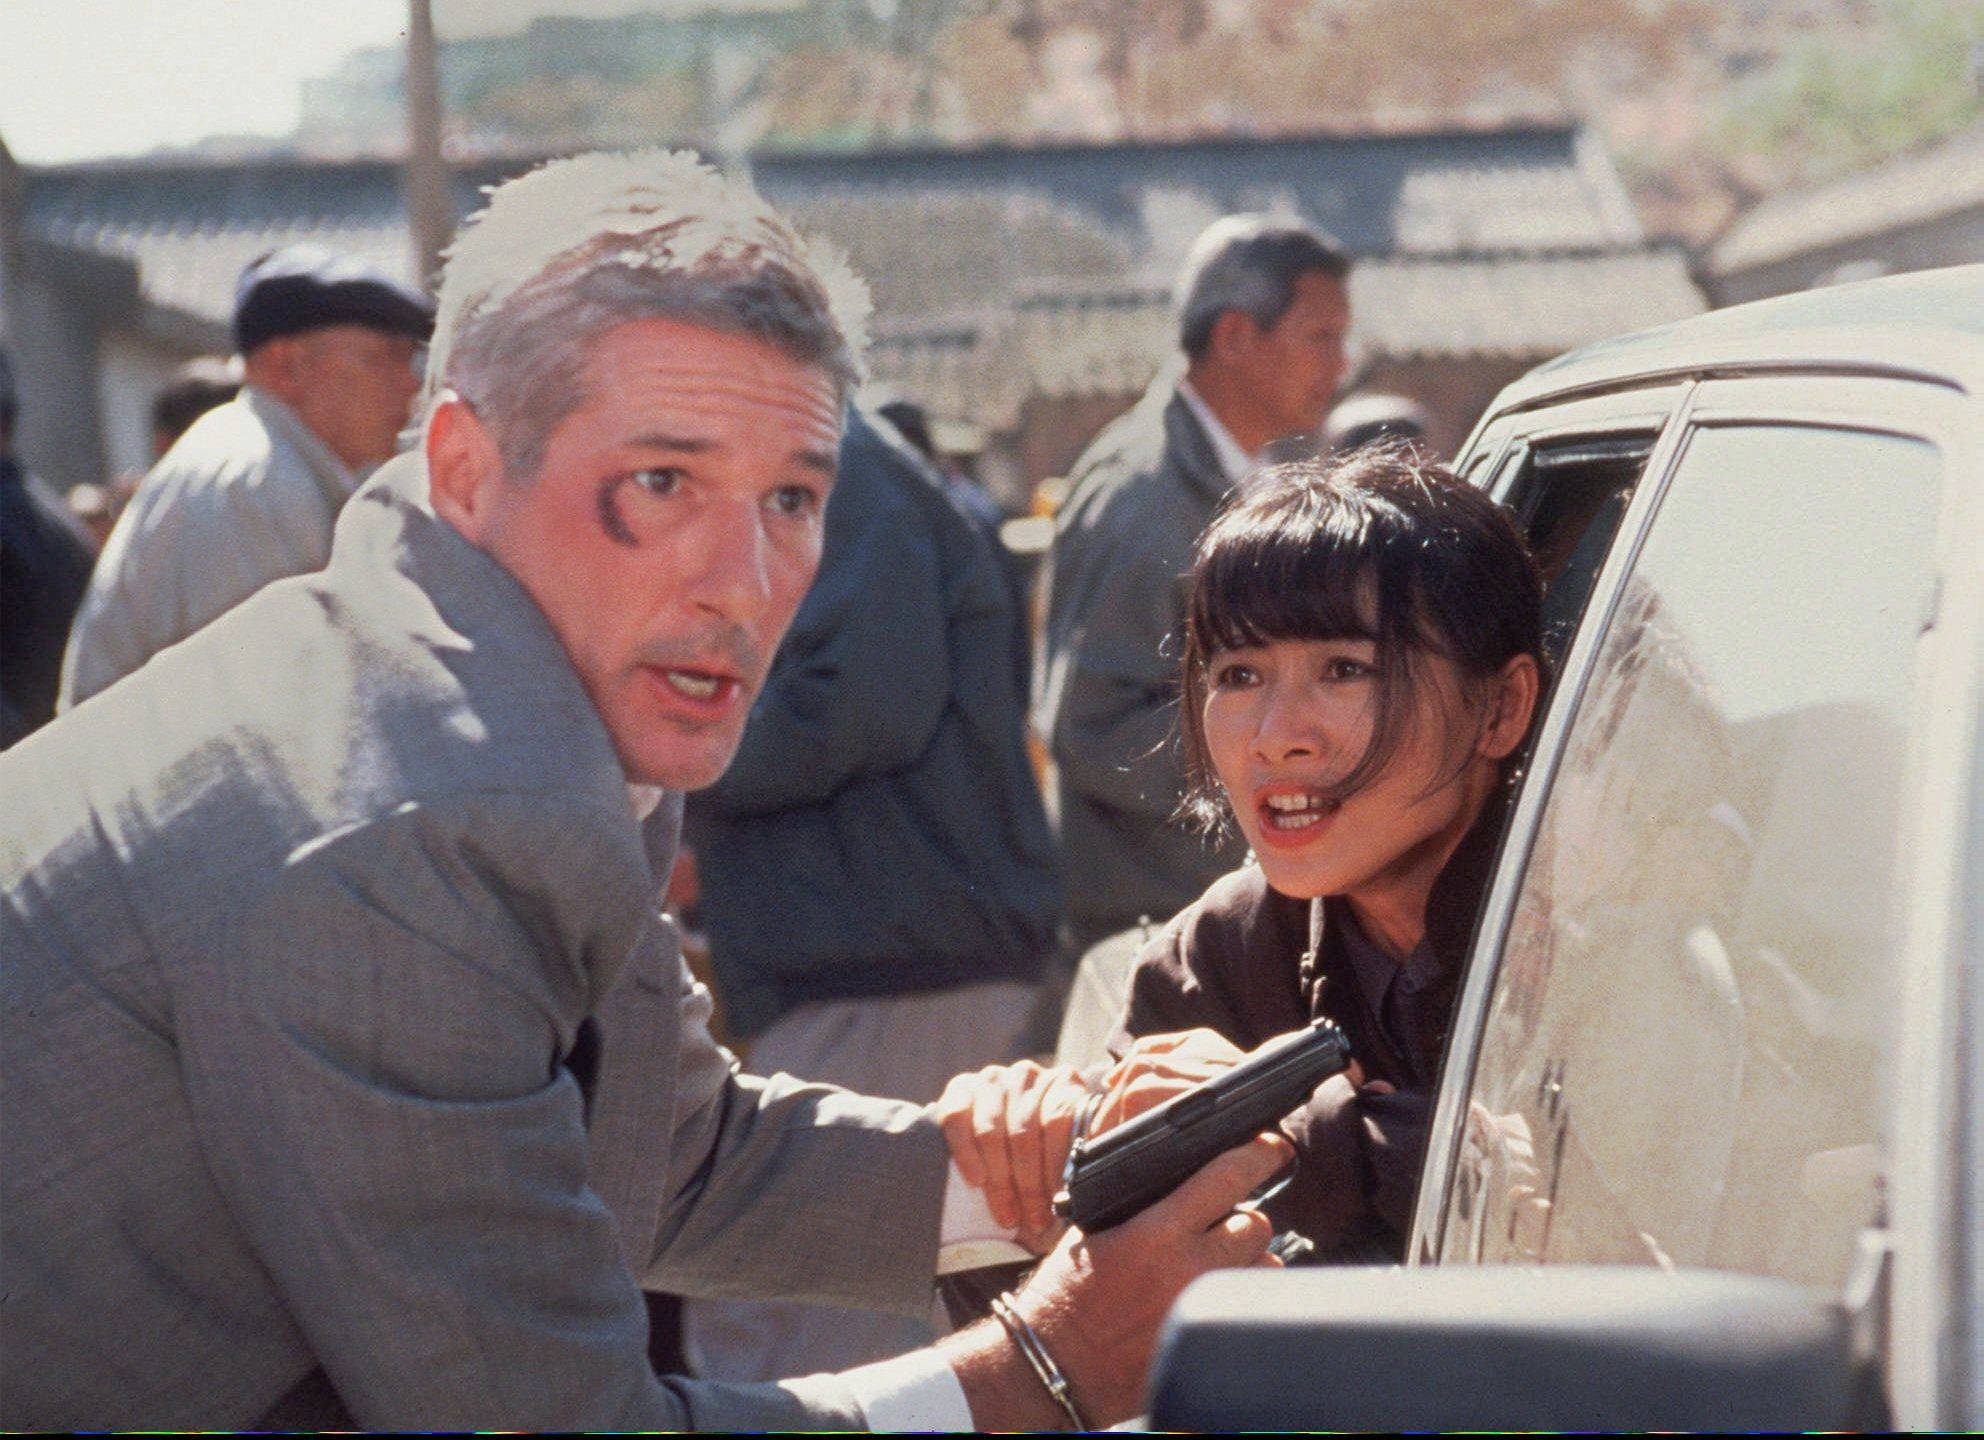 FOR USE WITH FEATURE PACKAGE FOR SUNDAY NOV. 2 --Chinese actress Bai Ling begs Richard Gere not to run in a scene from the movie “Red Corner,” being released Friday, Oct. 31.  “Red Corner,” an account of an American executive framed for murder and railroaded by the Chinese judicial system, is one of five films being released that deal with Chinese oppression.  The fresh batch of China-related films is motivated by genuine concern about international human rights and the film business’ unique position to advocate for change. (AP Photo/Richard Foreman Jr., HO)